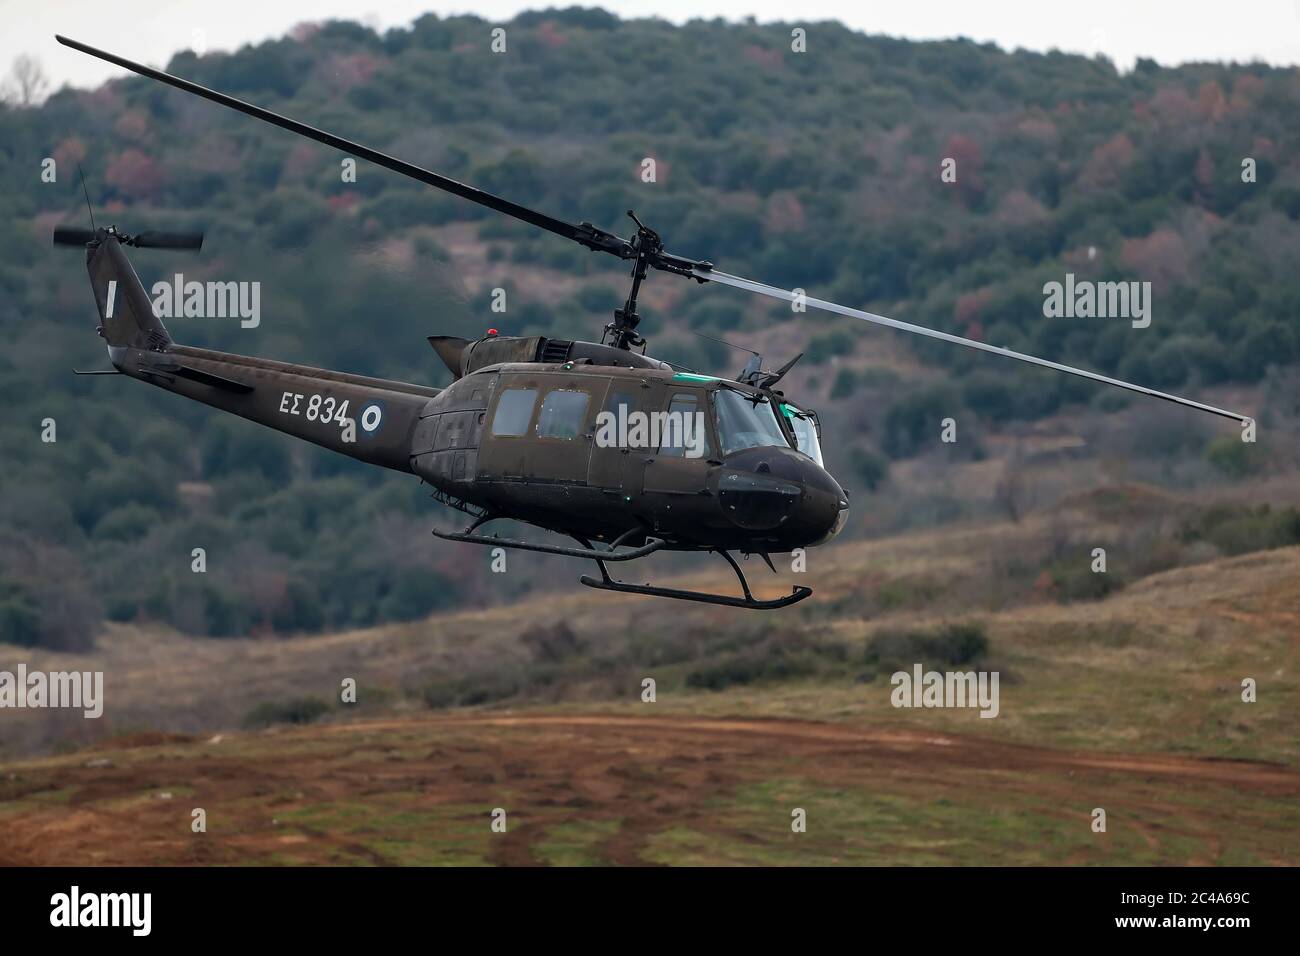 Askos, Greece - Feb 14, 2020: UH-1H Huey Helicopter takes part at a international military exercise with real fire (Golden Fleece -20) between Greek , Stock Photo